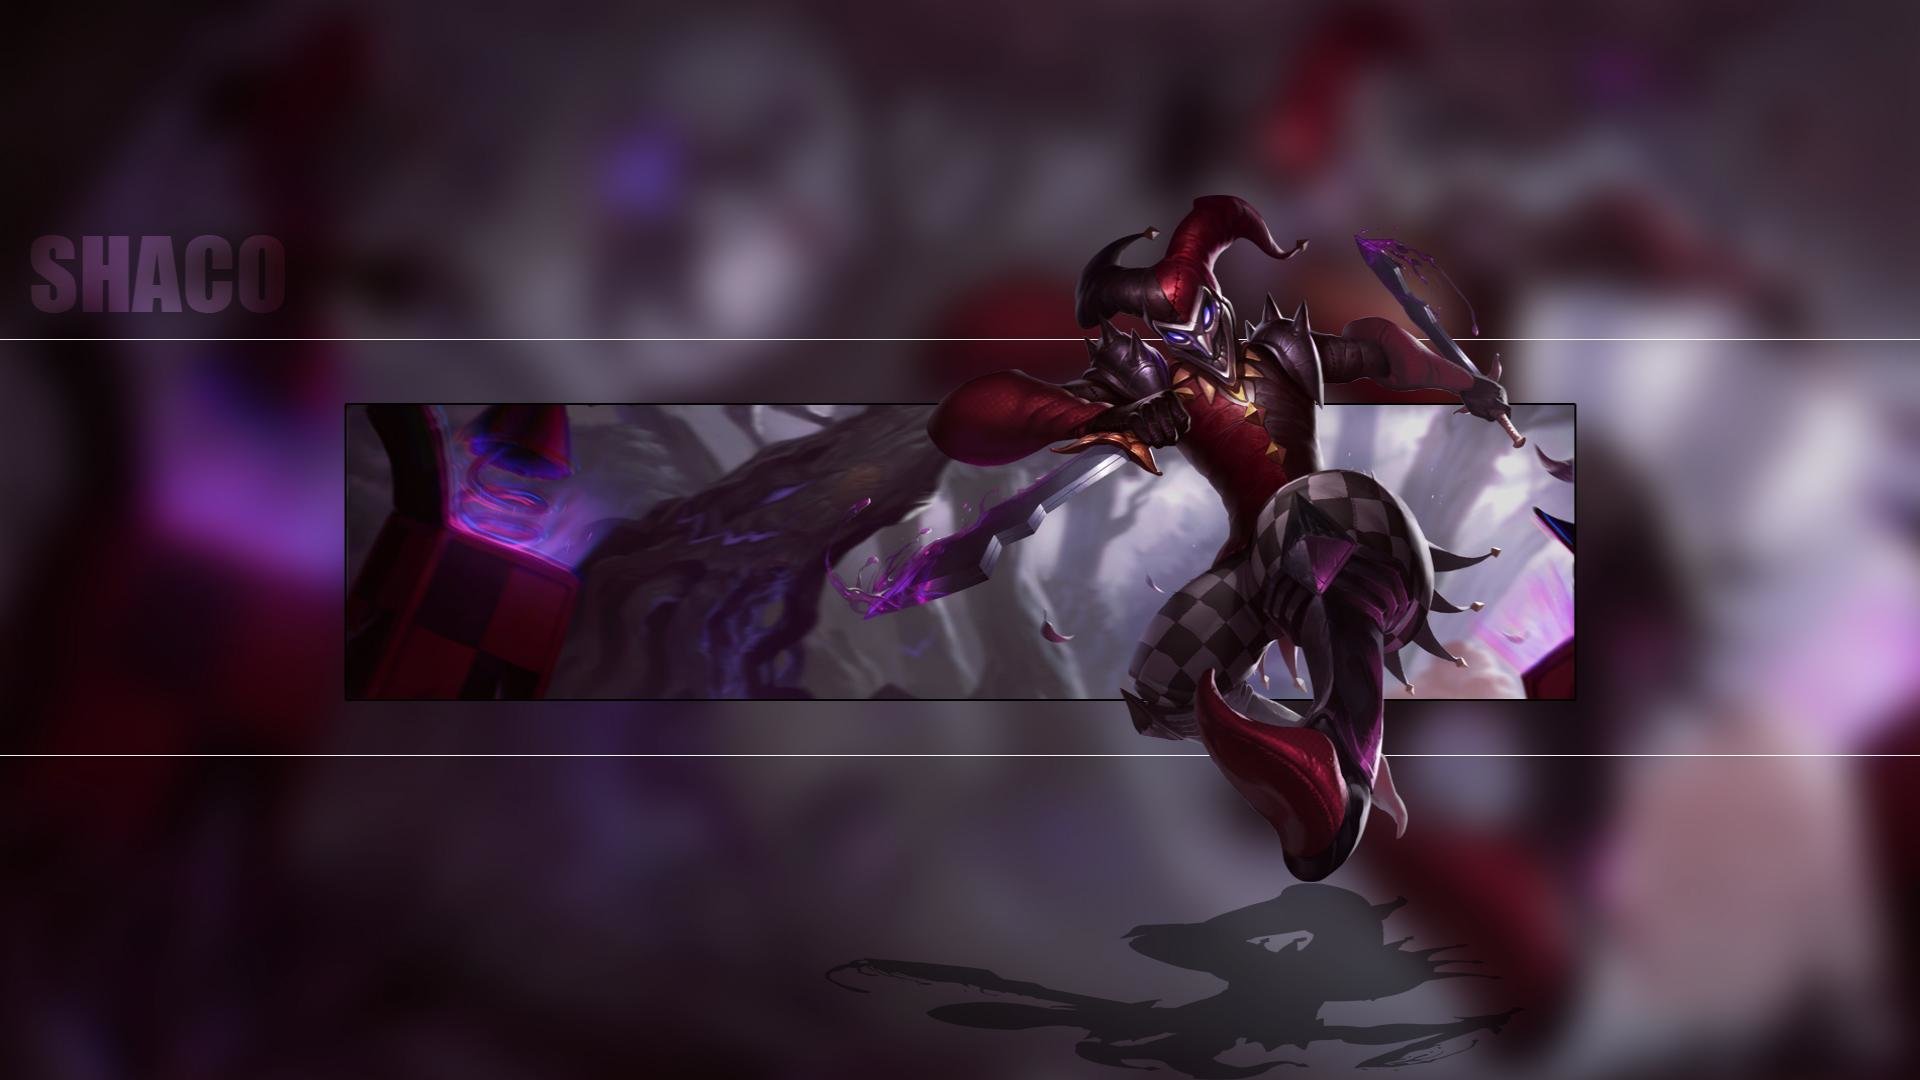 Shaco League Of Legends Wallpapers Hd For Desktop Backgrounds